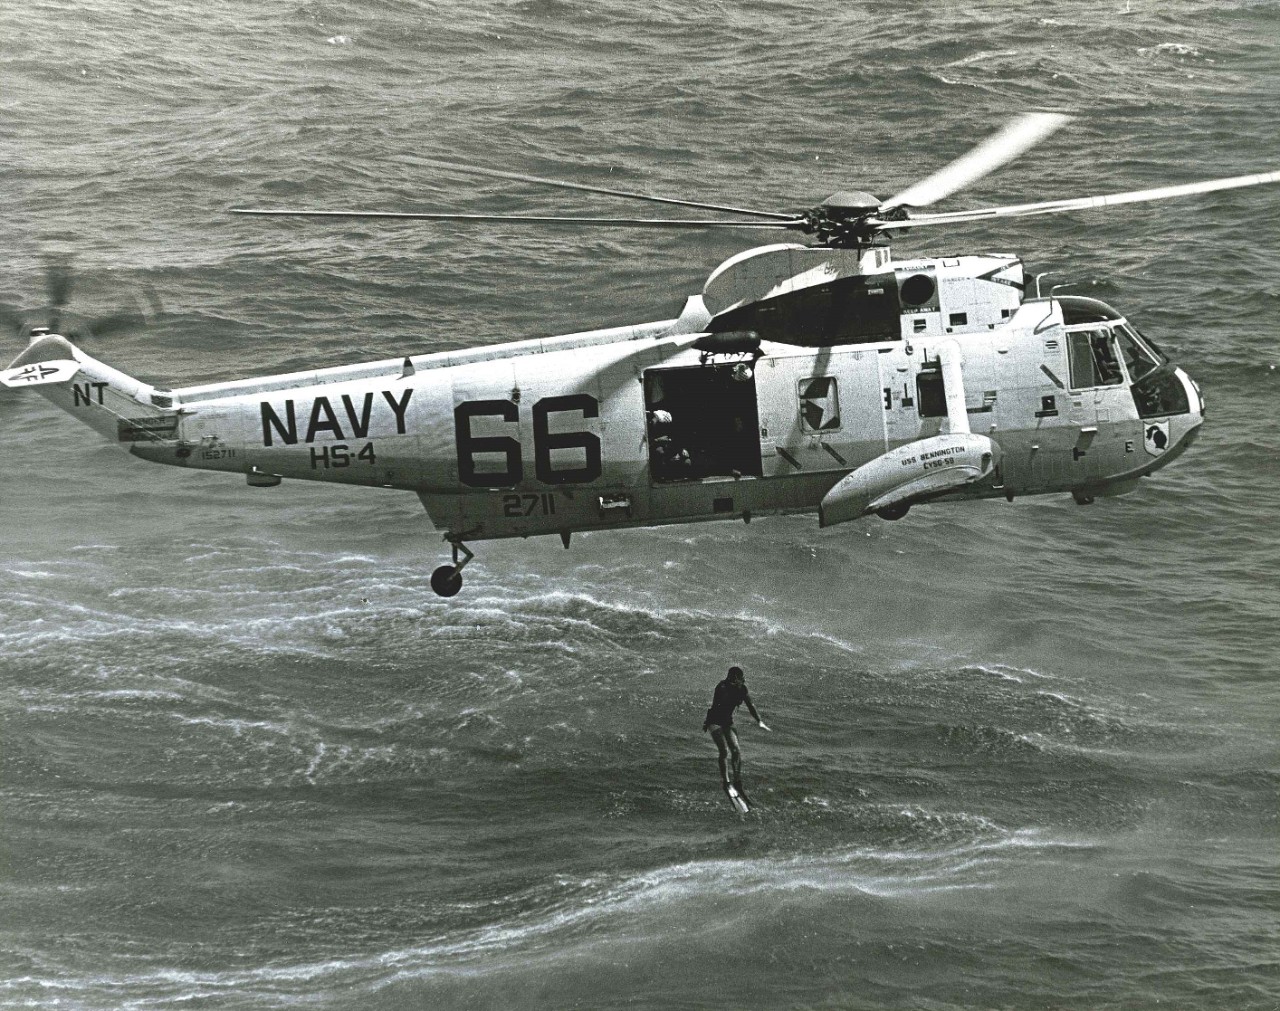 <p>A helicopter drops a UDT swimmer into the water during Apollo 11 recovery practice&nbsp;exercises.&nbsp;</p>
